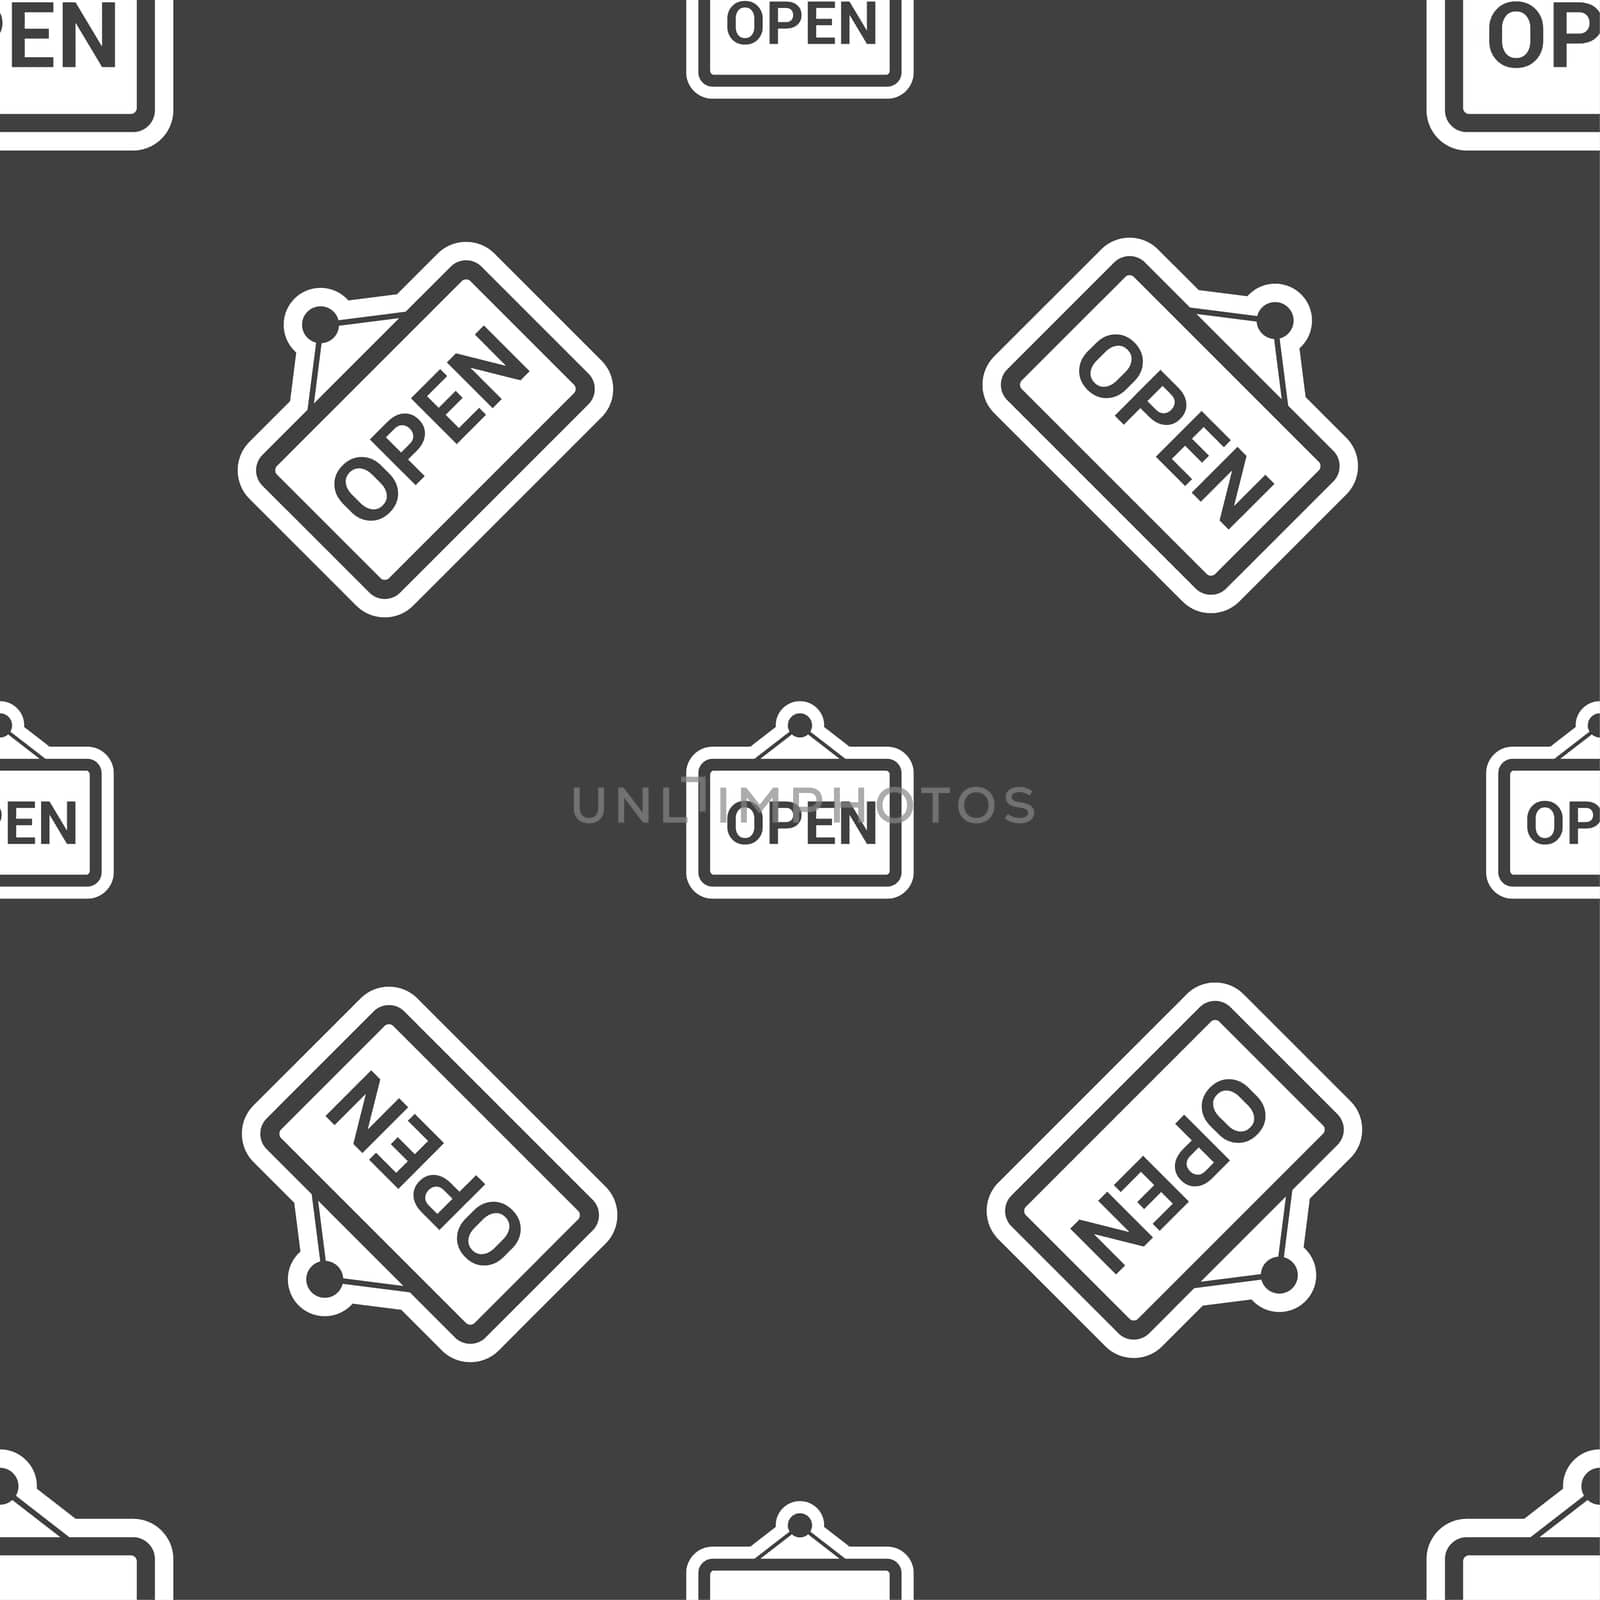 open icon sign. Seamless pattern on a gray background. illustration